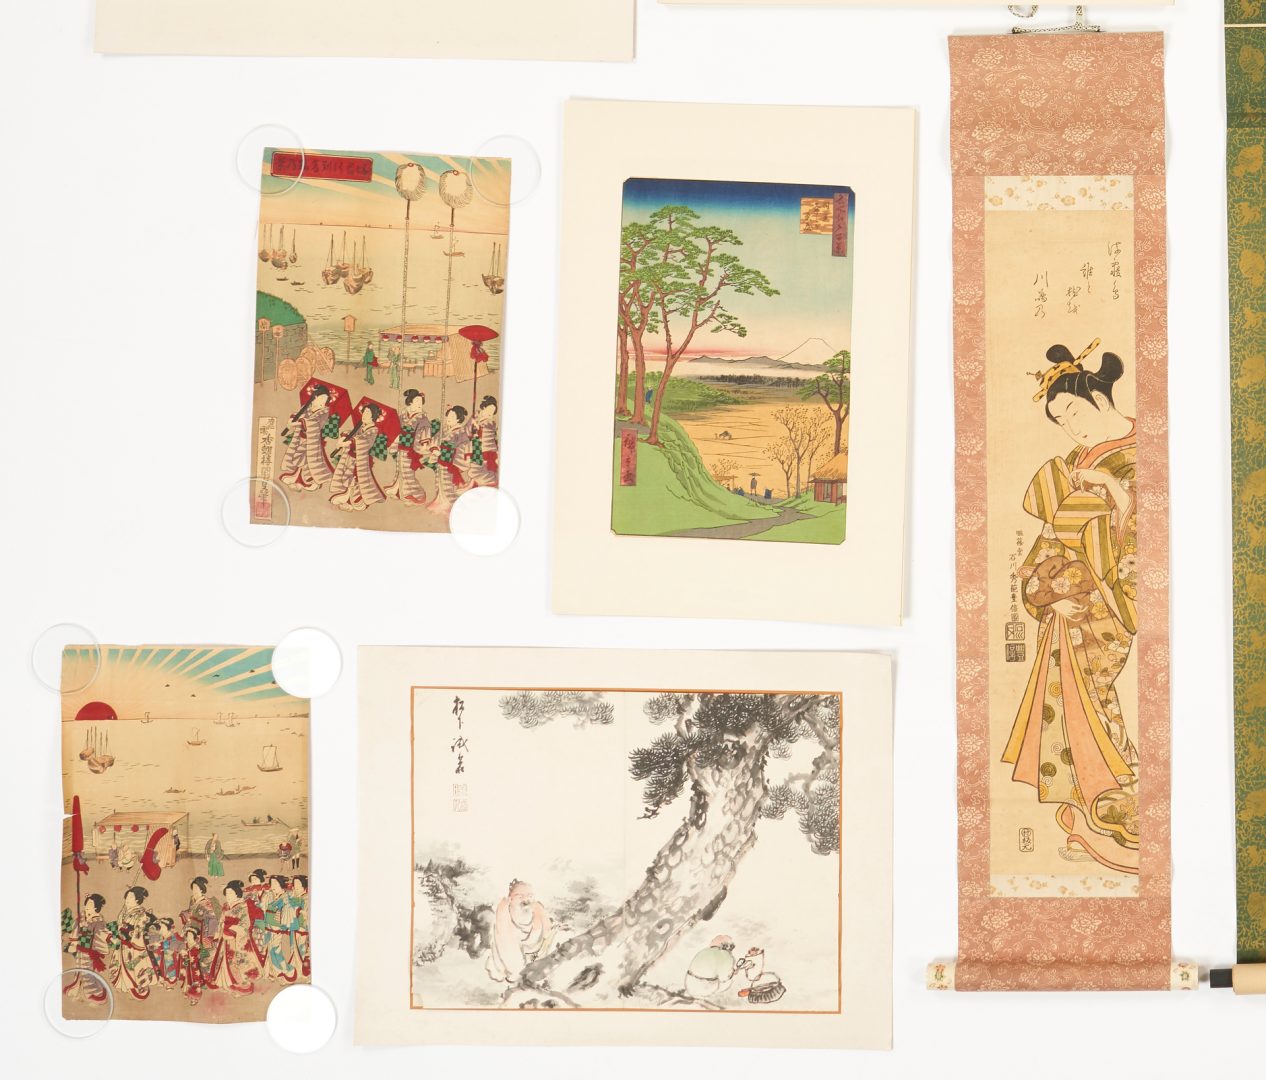 Lot 15: 13 Asian Artworks, incl. Scrolls, Chinese W/C, Japanese Woodblock Prints, 3 Books